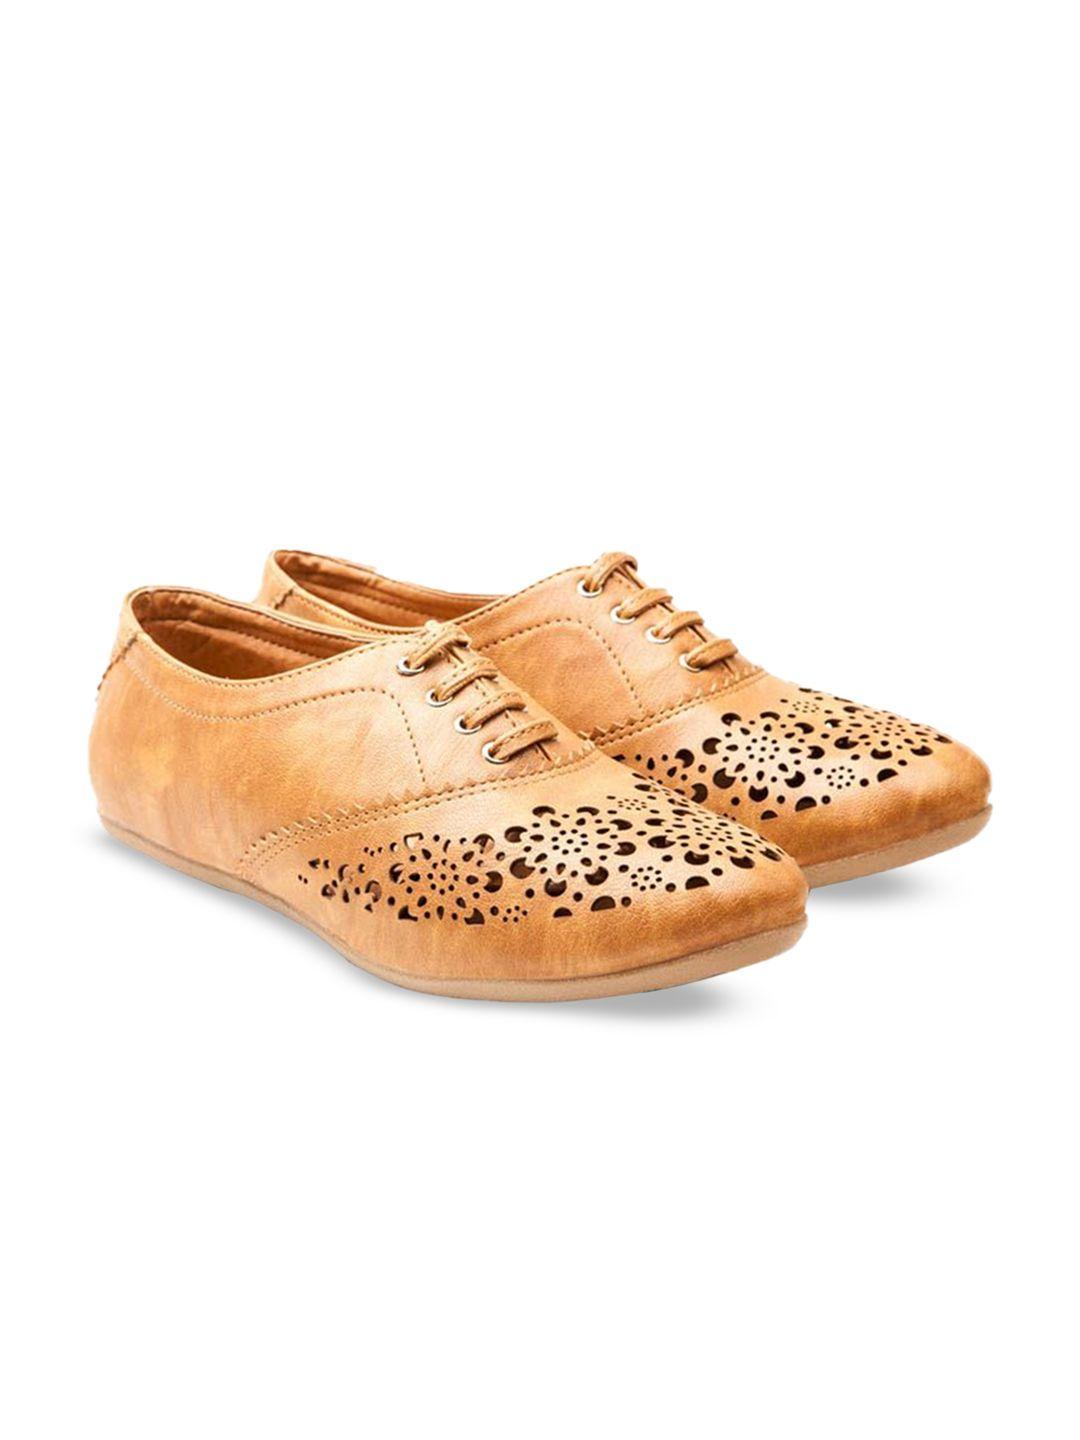 marc loire women textured comfort insole oxfords with laser cuts